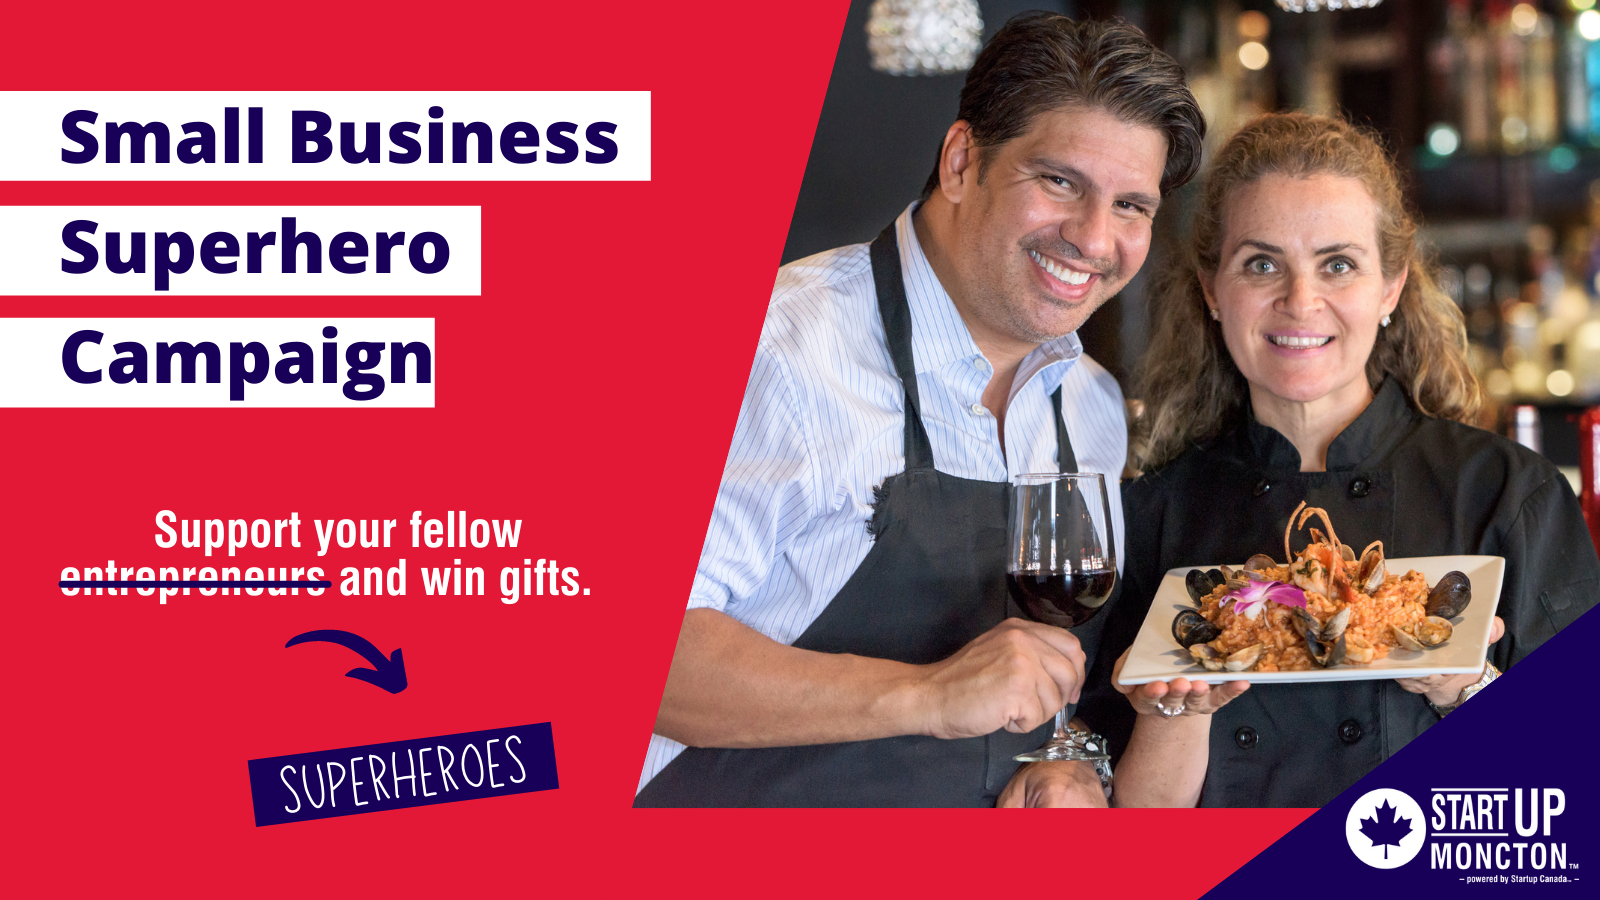 Small Business Heroes Campaign